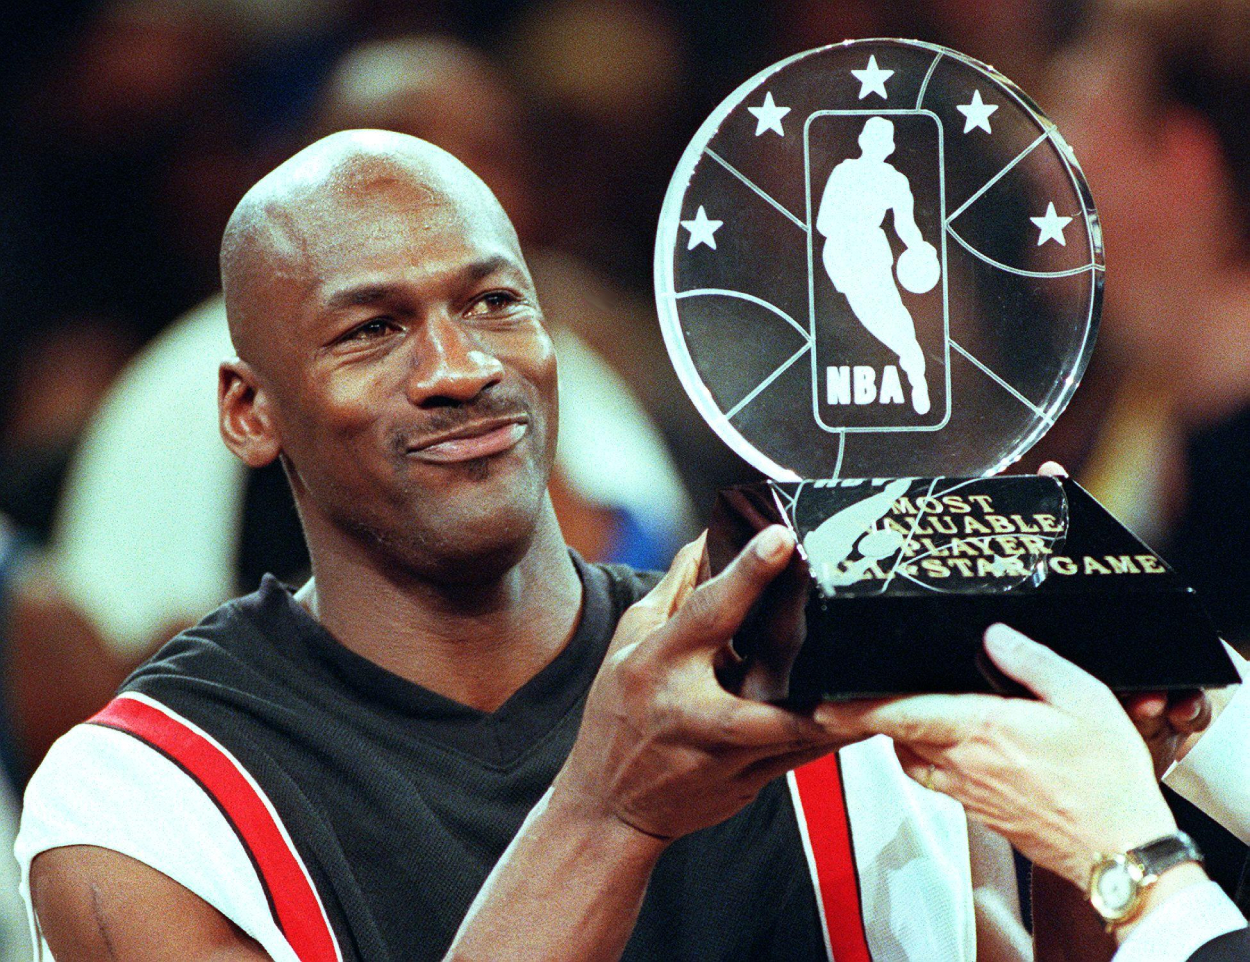 Former NBA star Michael Jordan, who many people consider to be the GOAT of all sports.